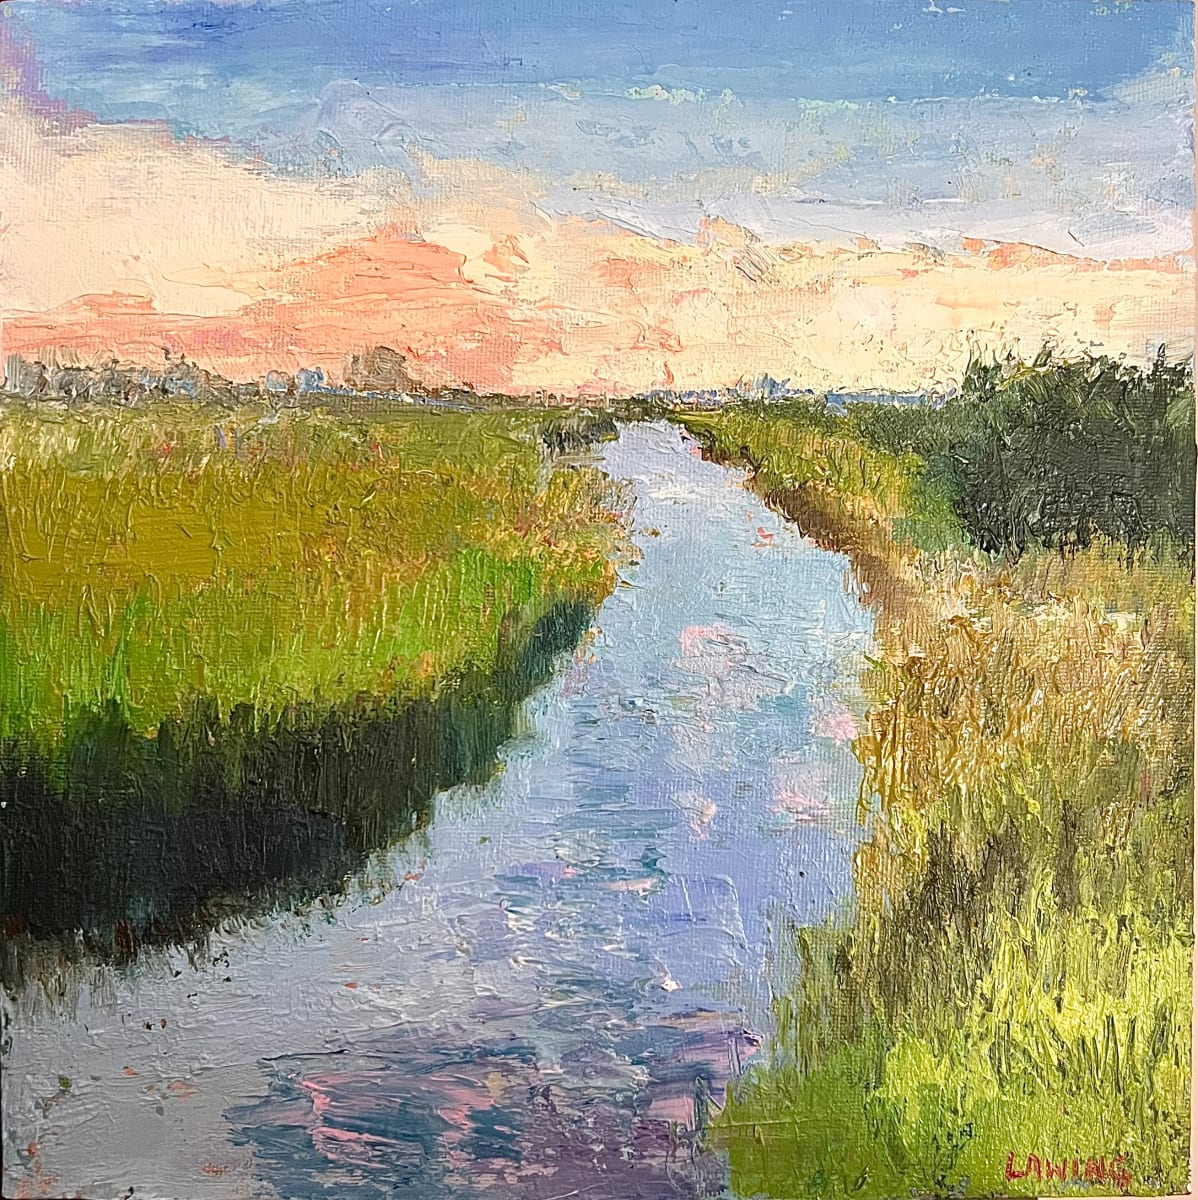 Redemption’s Kiss by Julia Chandler Lawing  Image: Marsh sunset, oil on canvas panel. 
Psalm 78:42–“They forgot His great love, how He took them by His hand, and with redemption’s kiss He delivered them from their enemies.”
‭‭Psalms‬ ‭78‬:‭42‬ ‭TPT ‬‬